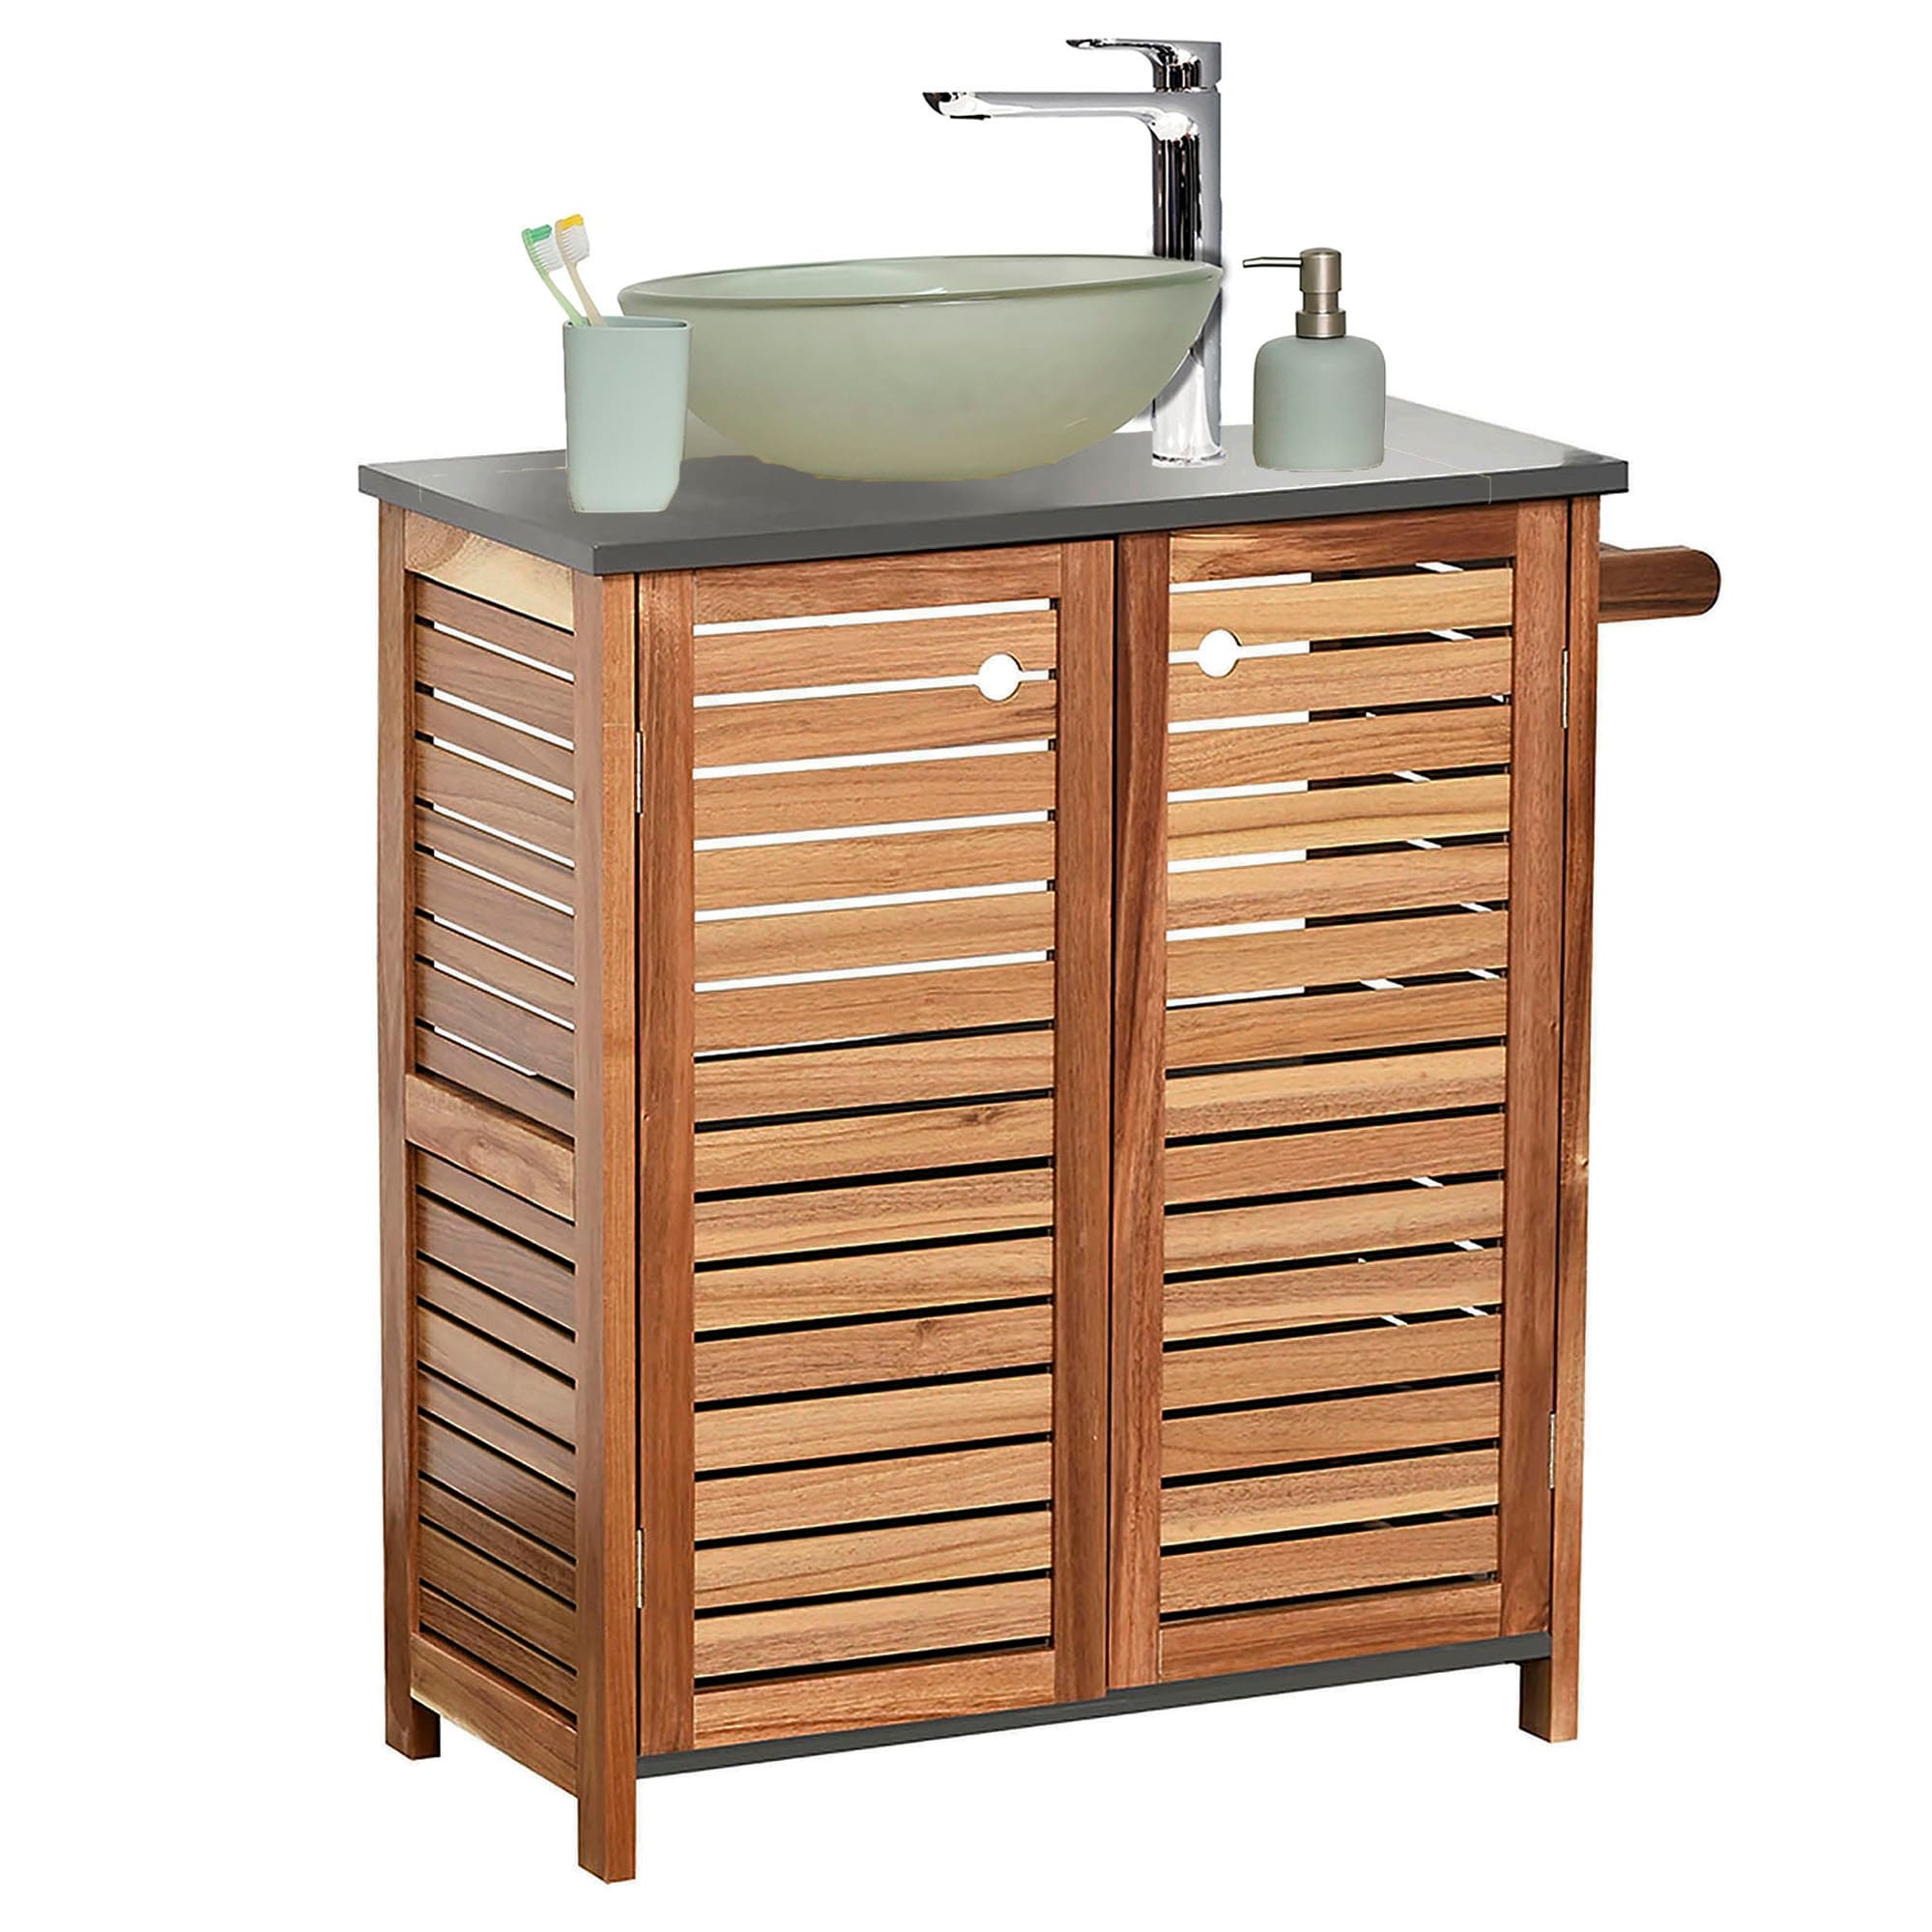 https://ak1.ostkcdn.com/images/products/is/images/direct/75d774ccbbf9dc8bb19ceeef4e7e182046efc8d9/Wall-Mounted-Sink-Cabinet-Elements-2-Doors-Acacia-Gray.jpg